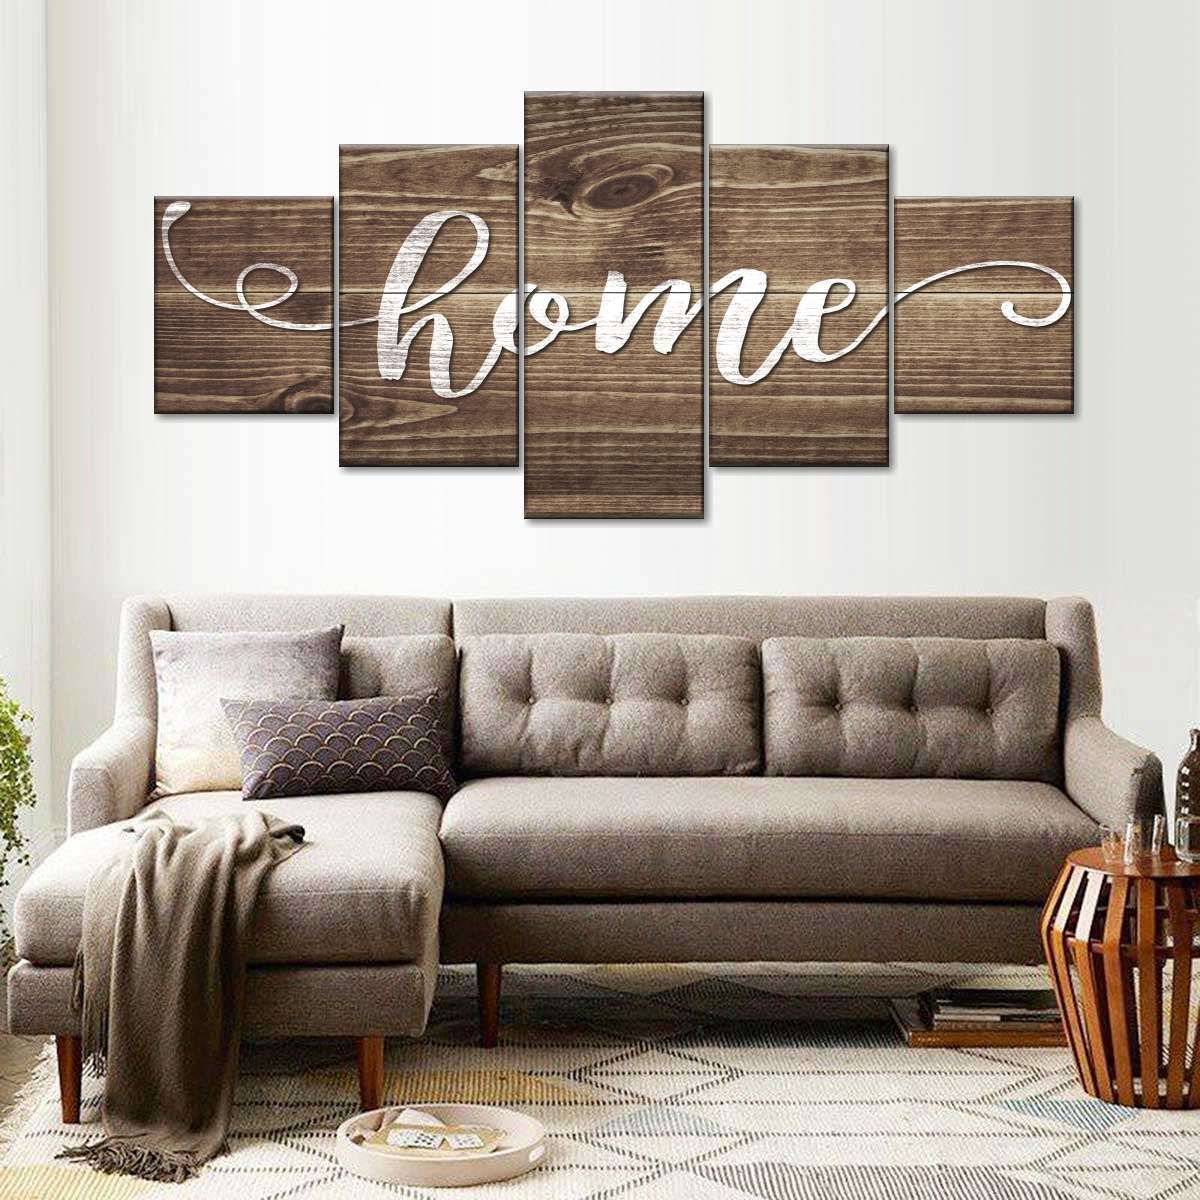 Home Multi Panel Canvas Wall Art -   18 diy projects to try home decor wall art ideas